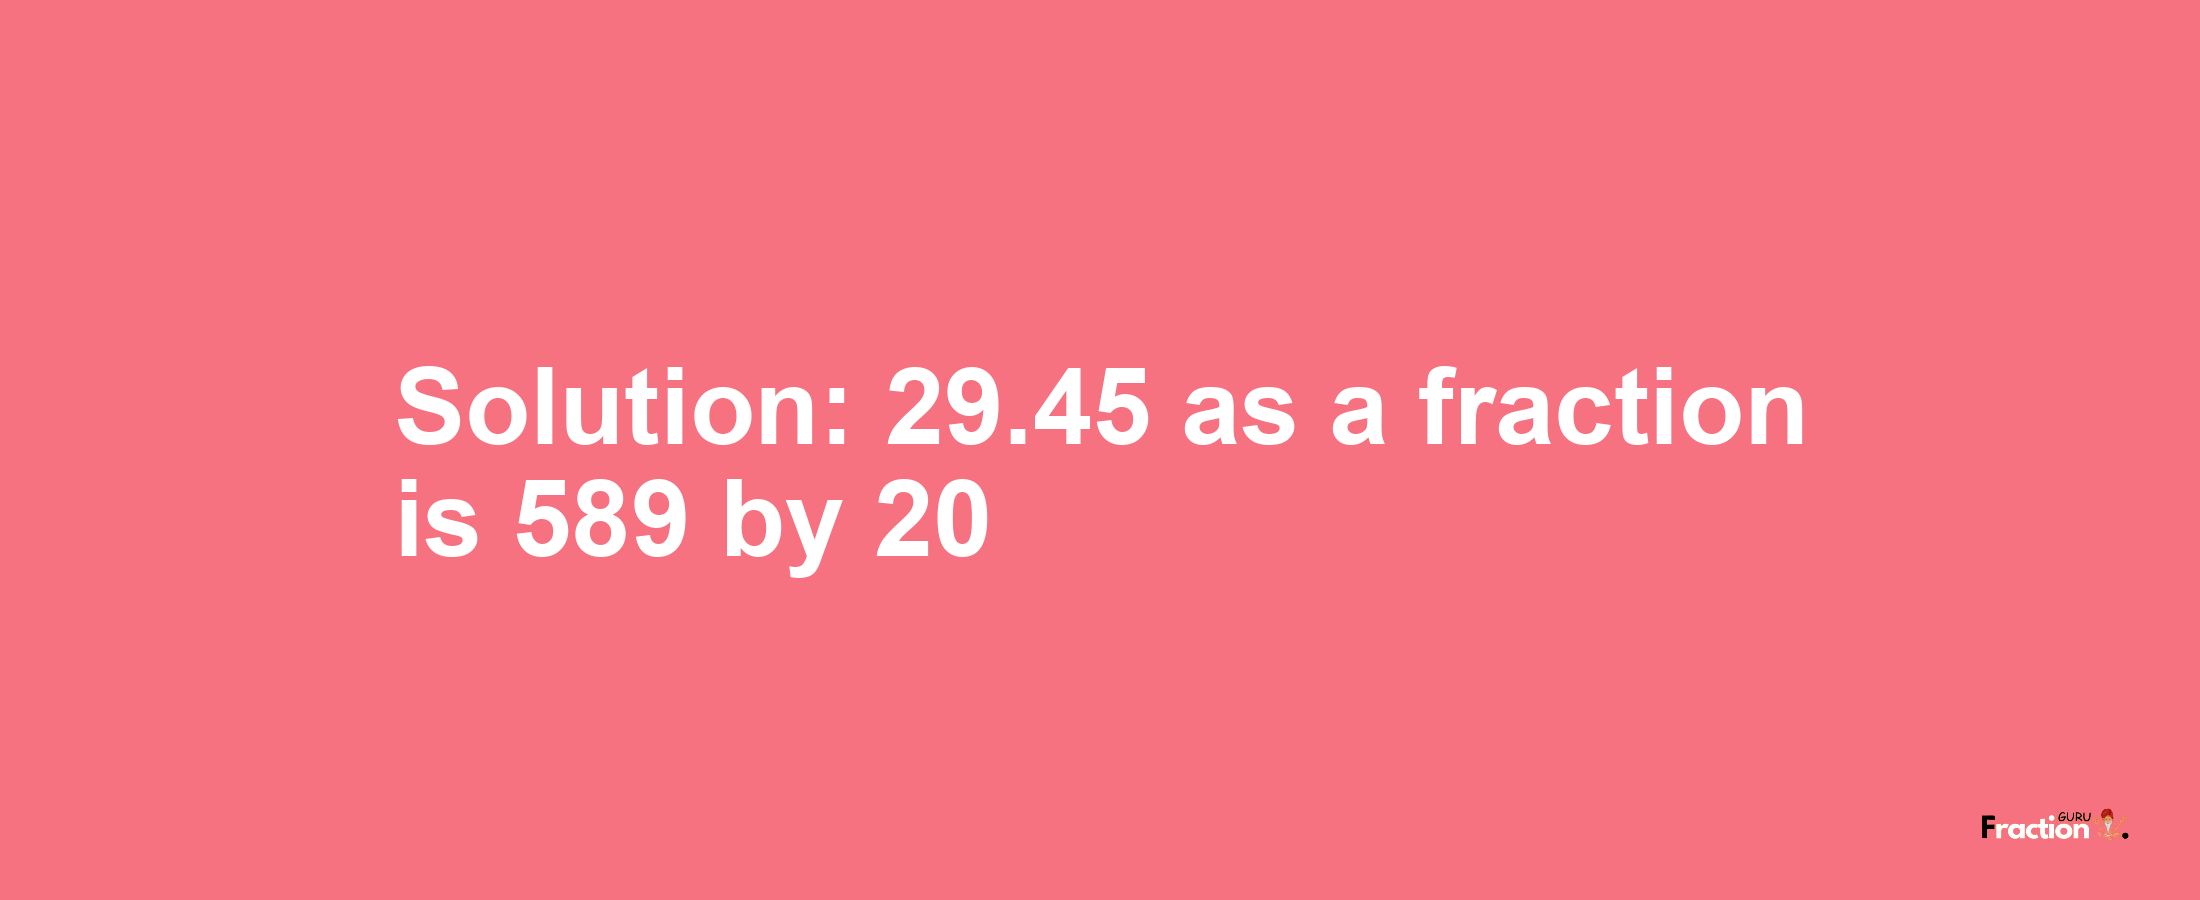 Solution:29.45 as a fraction is 589/20